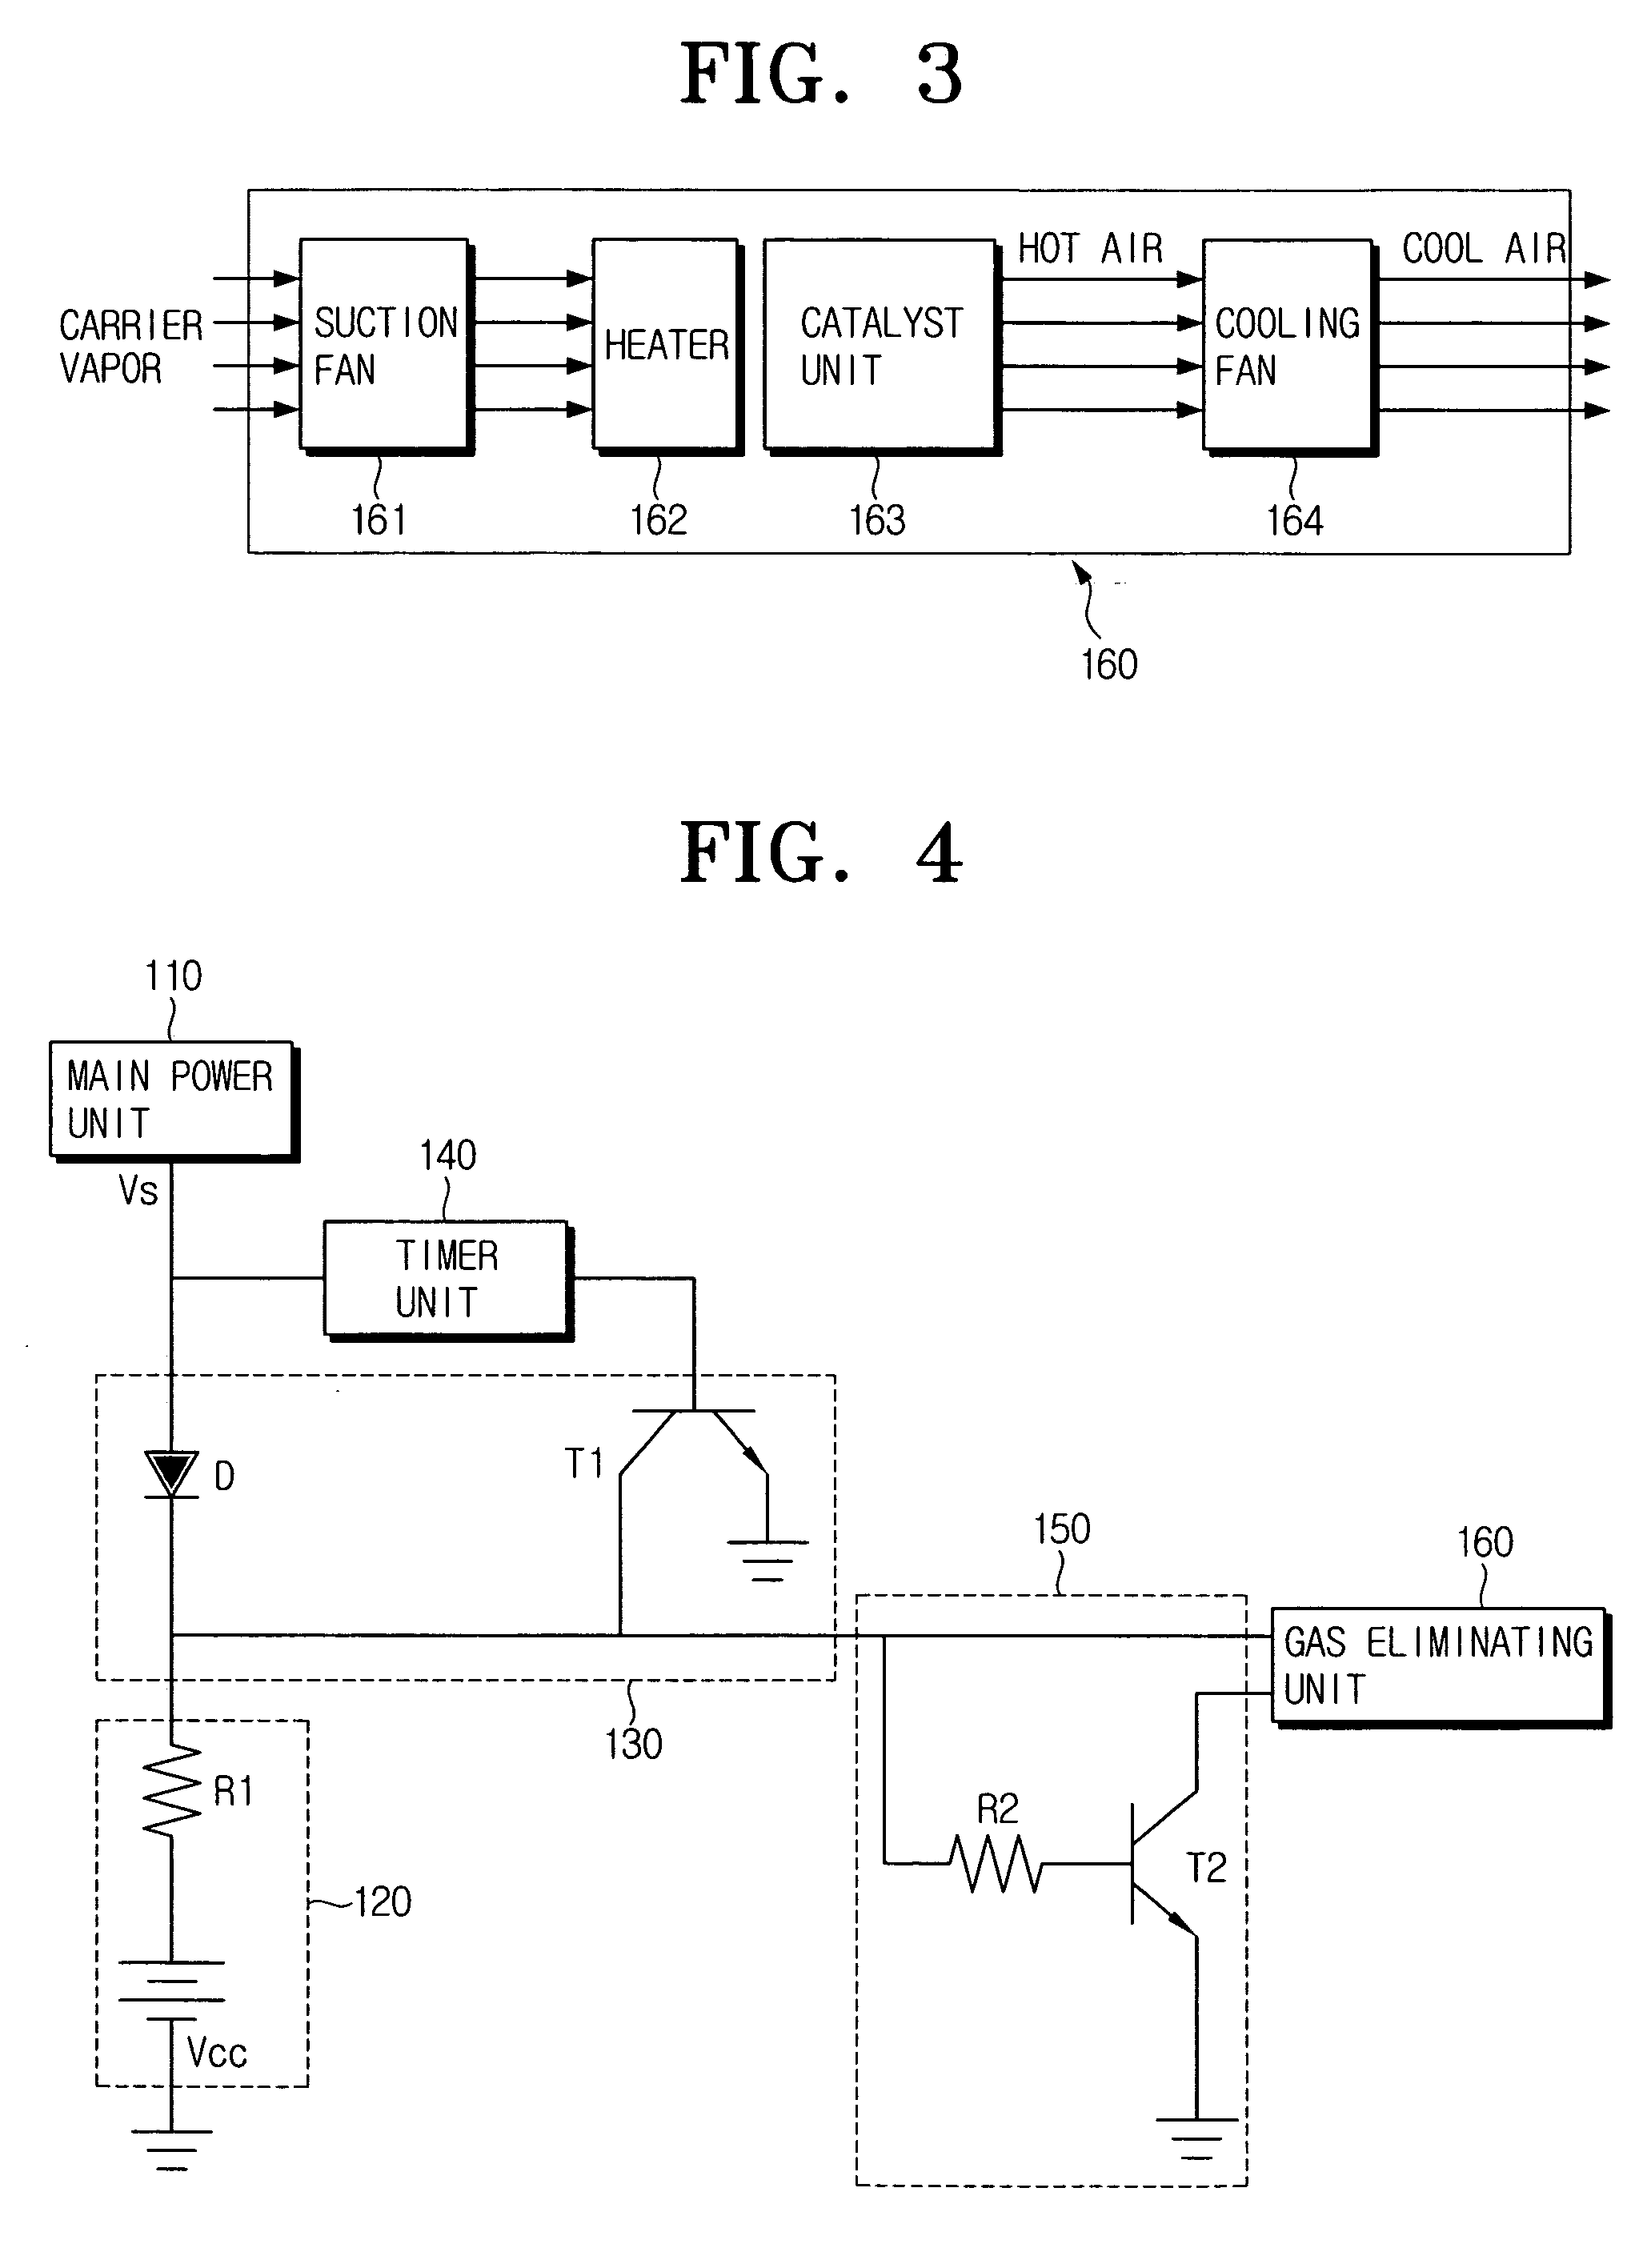 Liquid-type laser printer for eliminating internal gas by using sub-power and method thereof